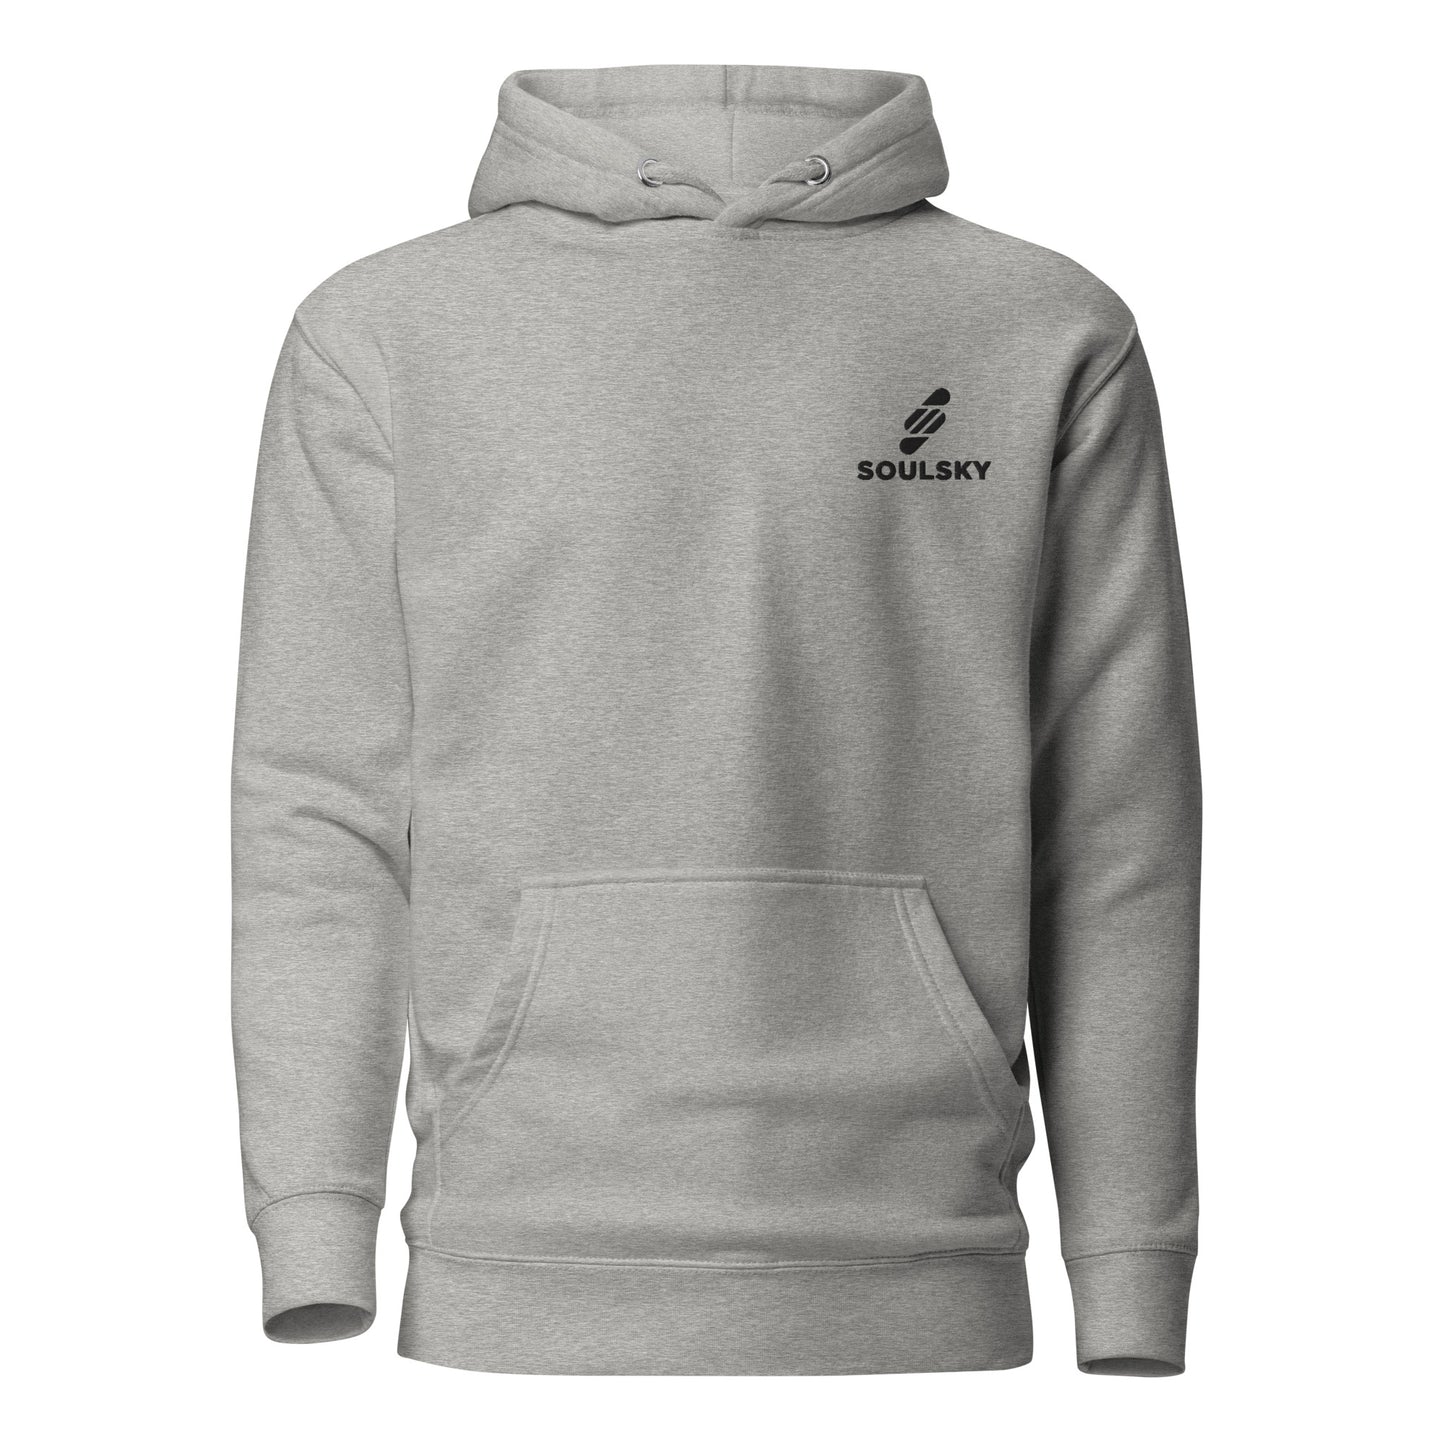 Light gray hoodie with black embroidered logo on the upper left side that says 'SOULSKY'.